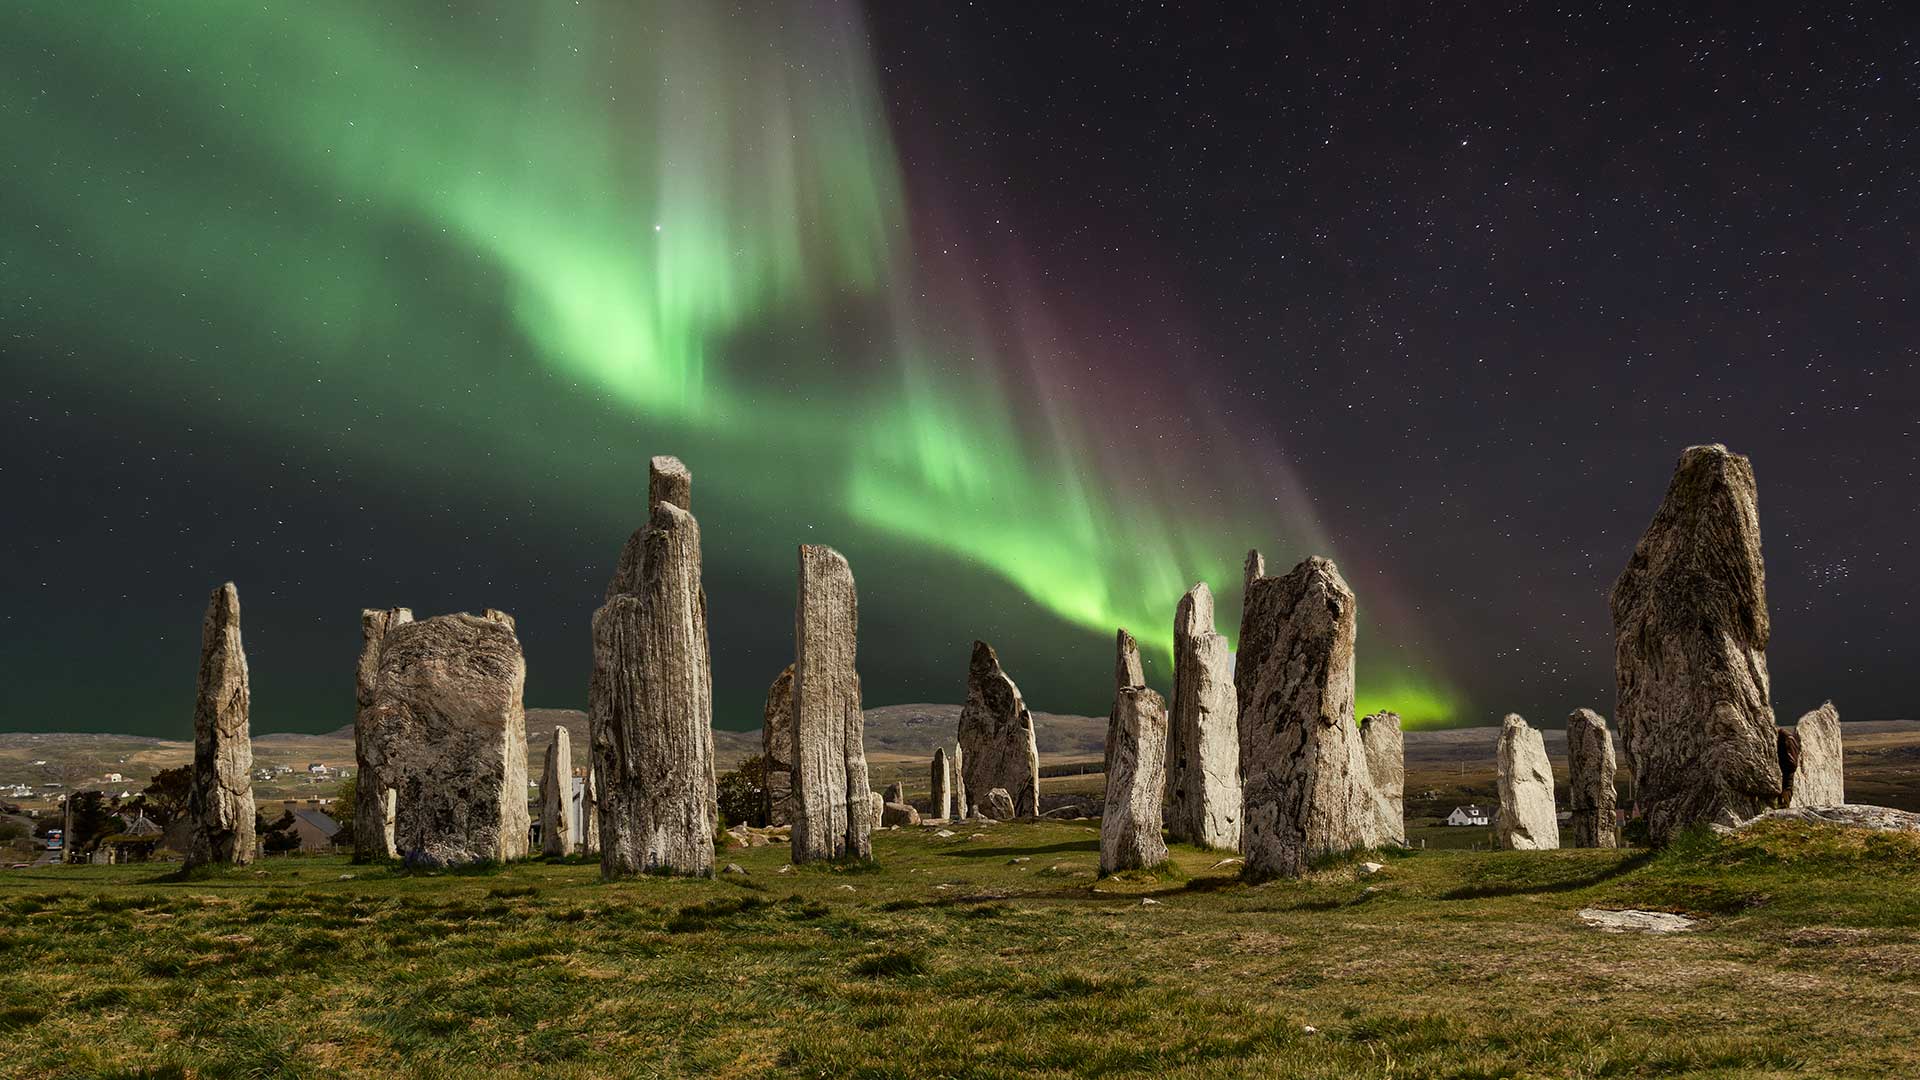 Where To Stay To See The Northern Lights In Scotland